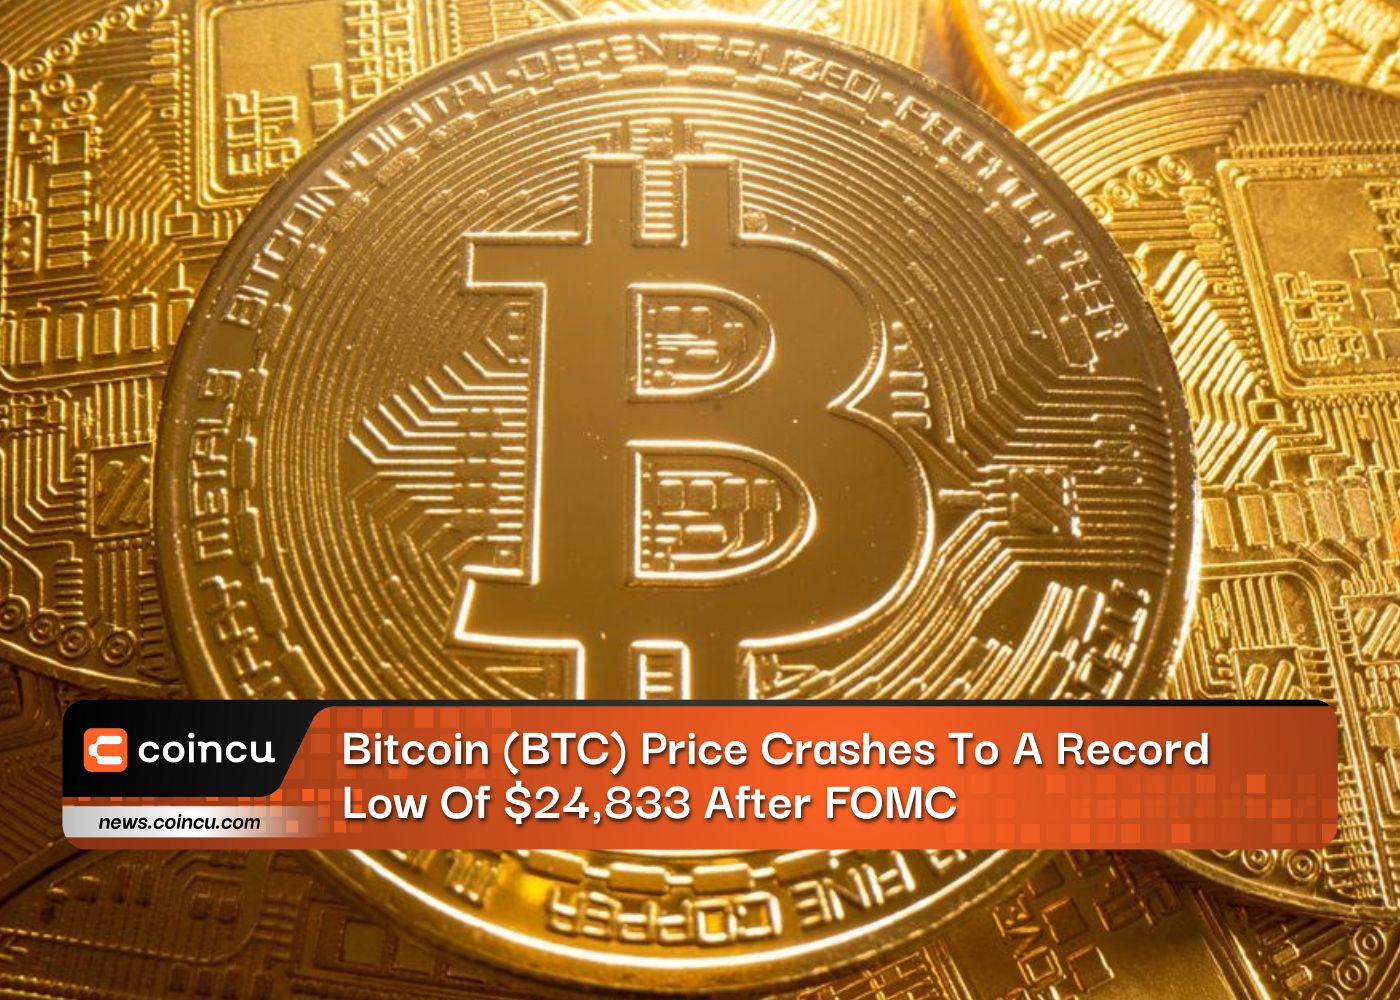 Bitcoin (BTC) Price Crashes To A Record Low Of $24,833 After FOMC